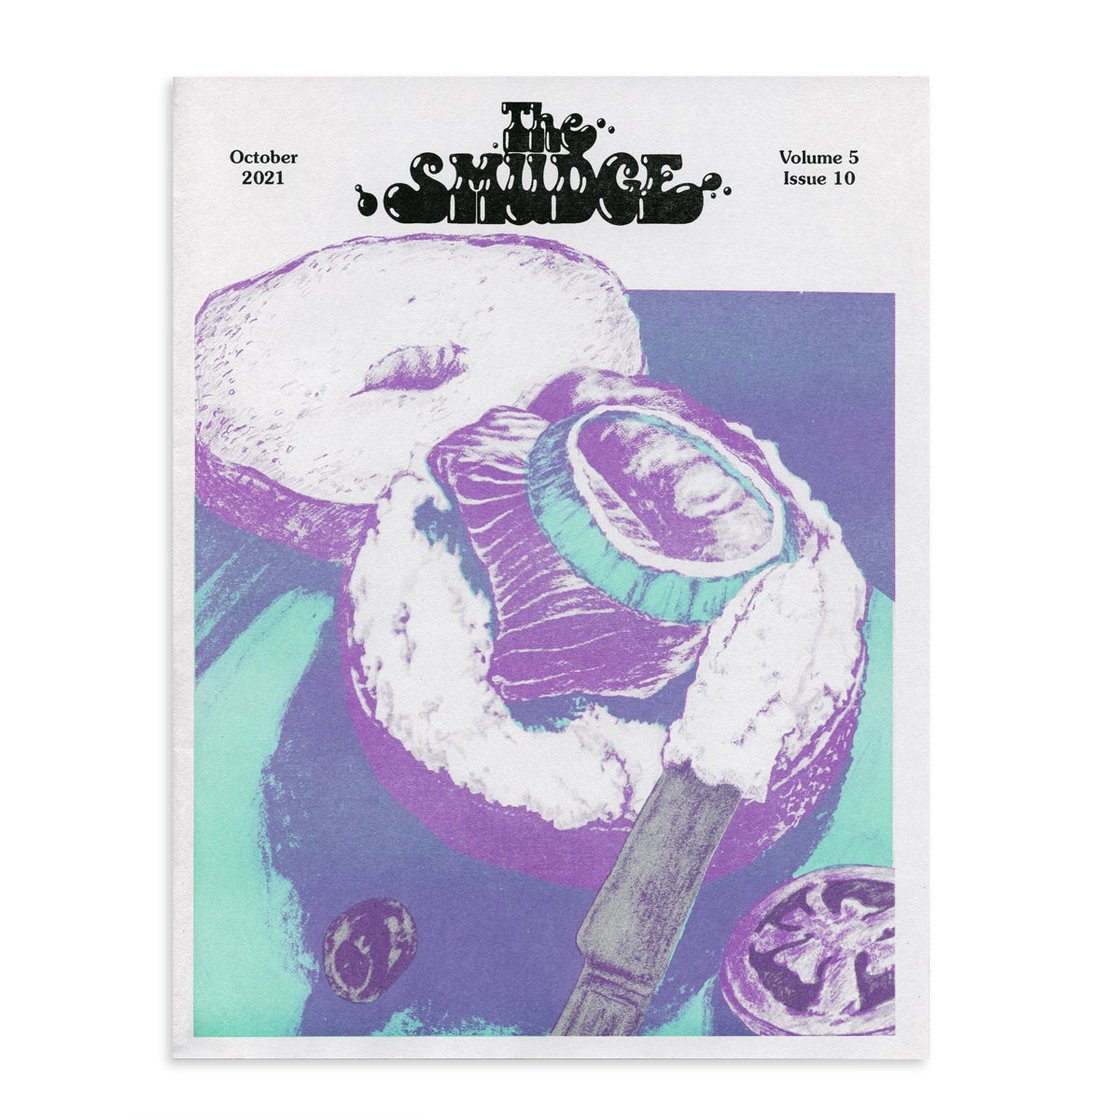 Image of The Smudge/ October 2021 – Volume 5, #Issue 10